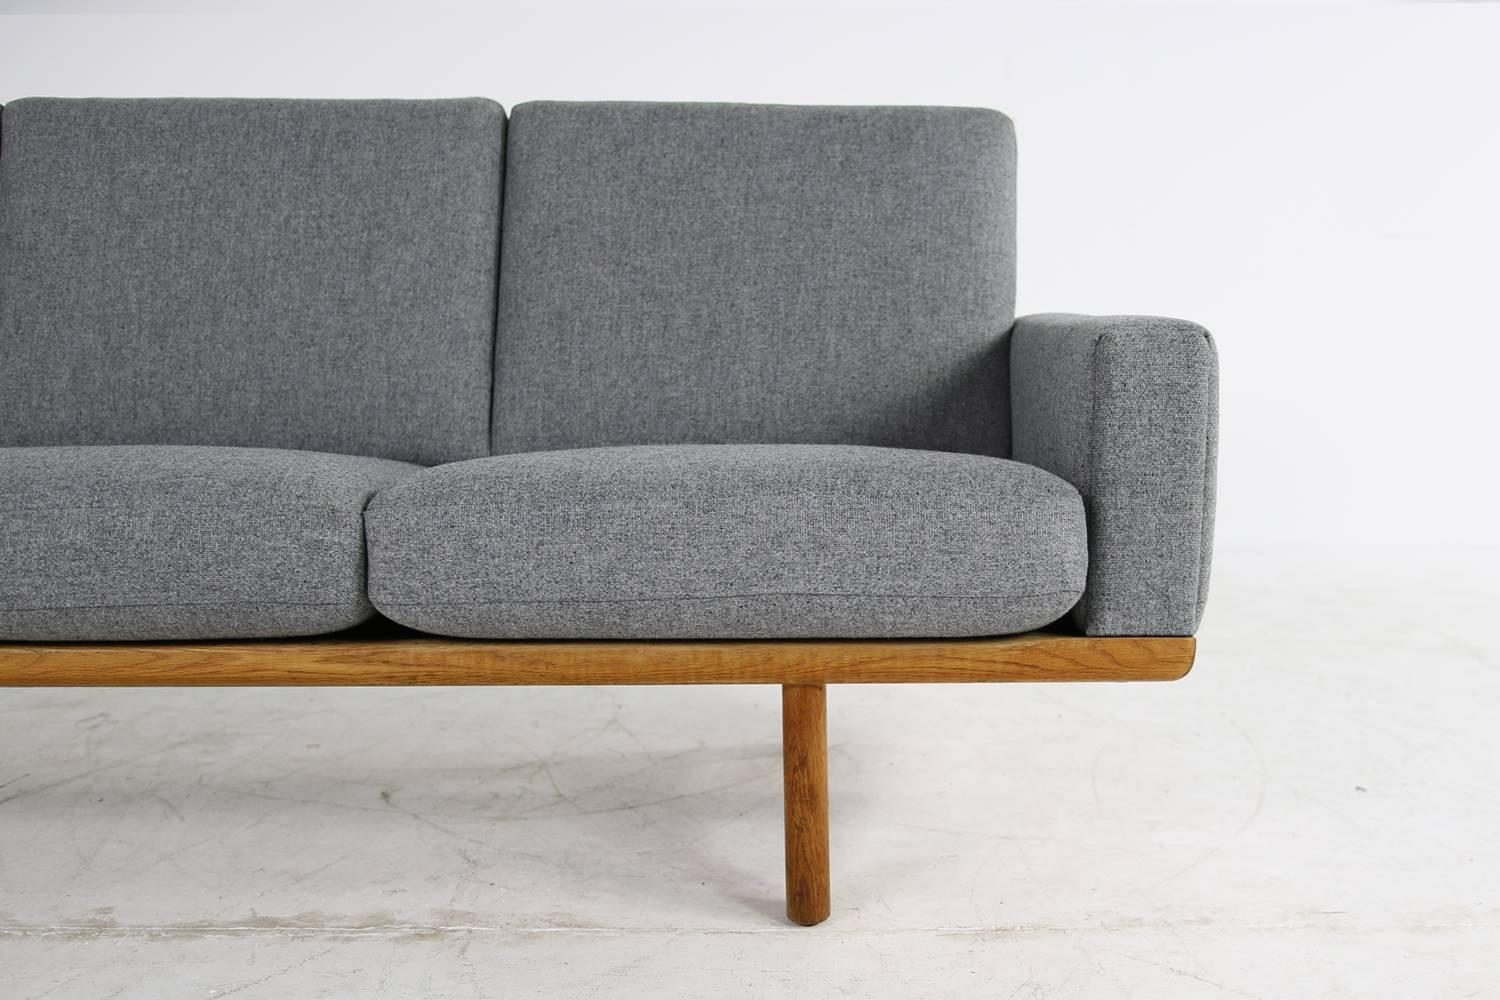 Beautiful Hans Wegner 1950s oak sofa, for GETAMA Denmark, Mod. GE 236-3
Fantastic condition, renewed upper spring cushions, upholstery in very good condition, high quality woven fabric. Early edition, beautiful.